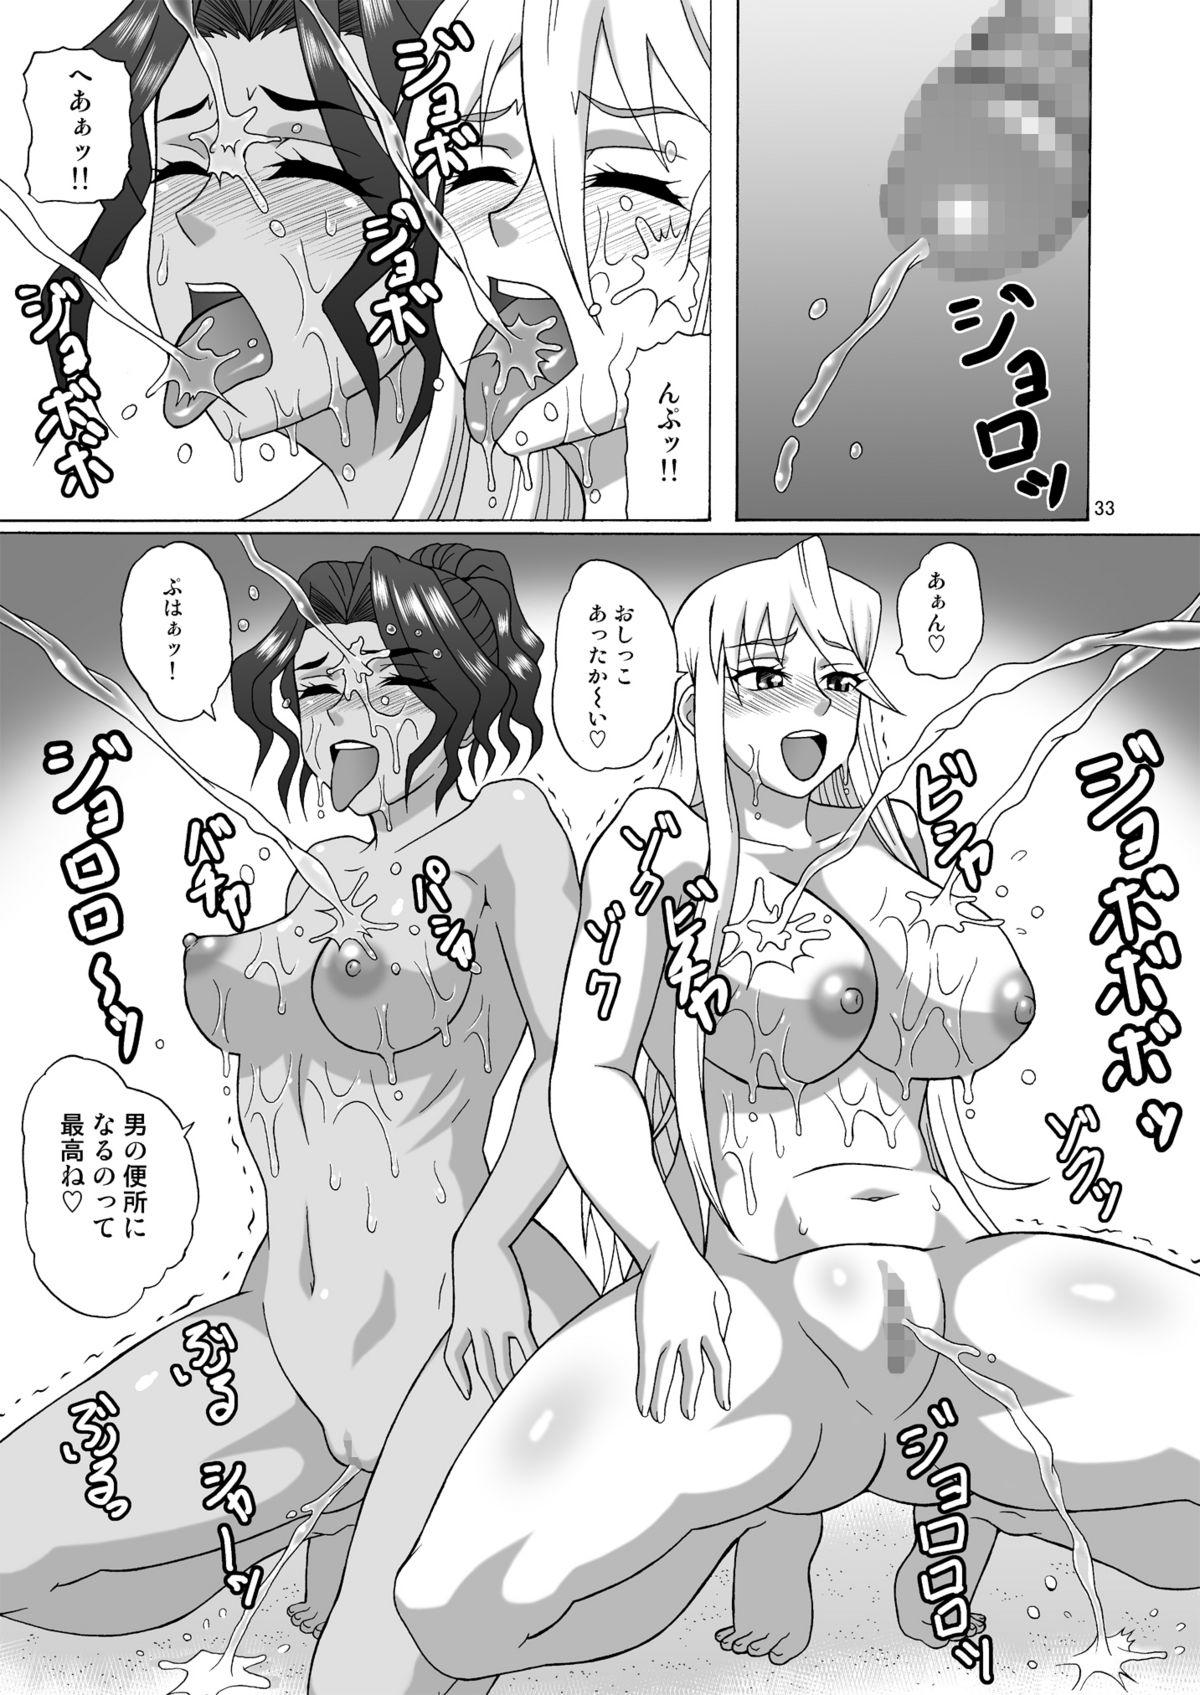 Bucetinha Beach no BITCH - Highschool of the dead Fat Pussy - Page 32